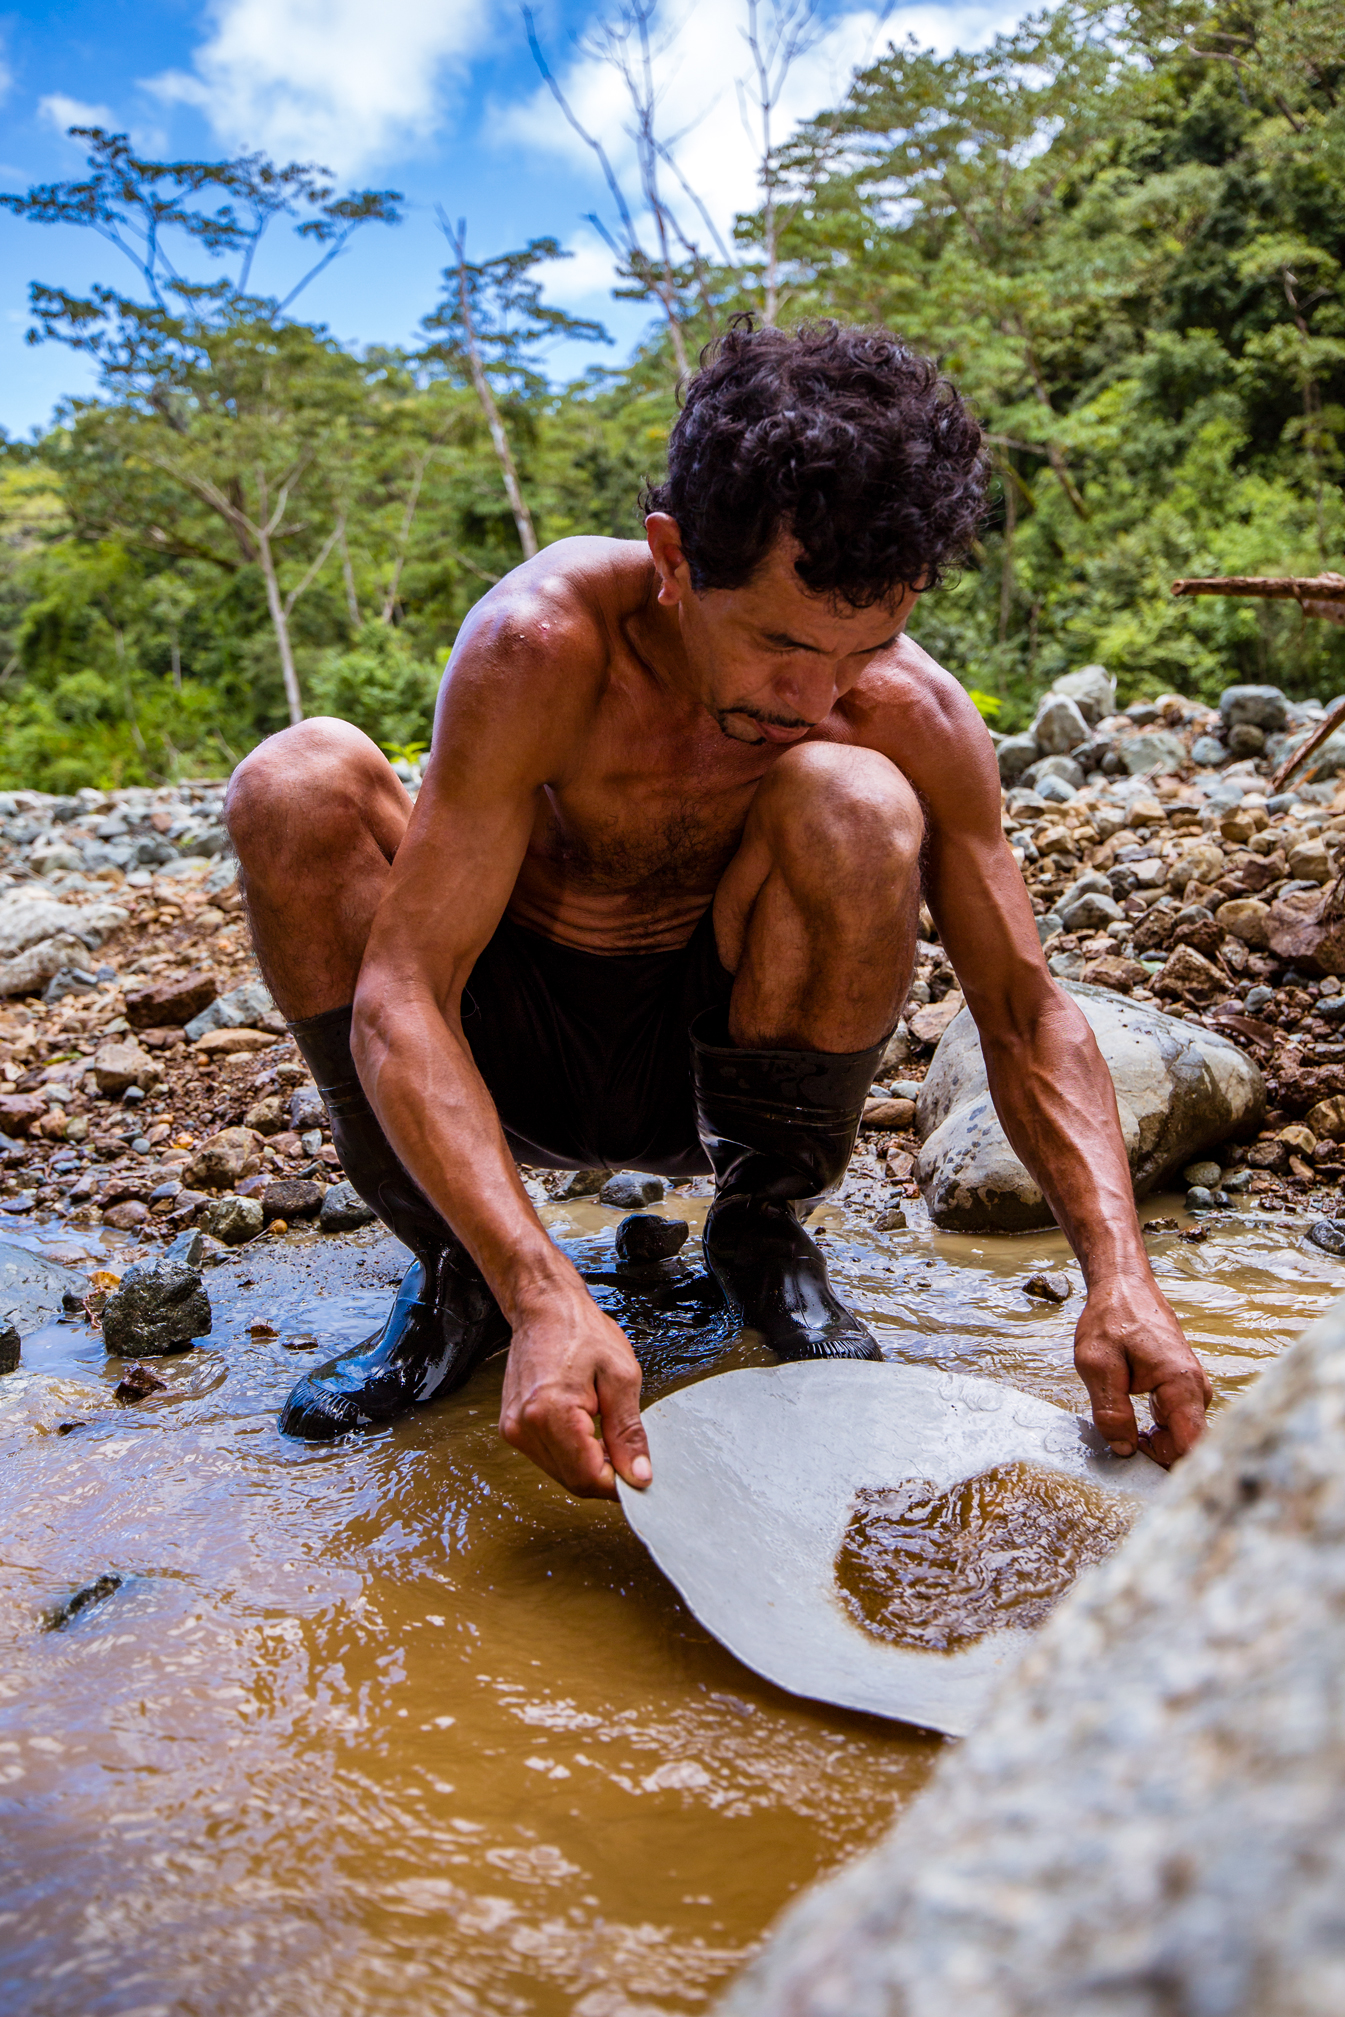 Gold Panning in Rio Carate